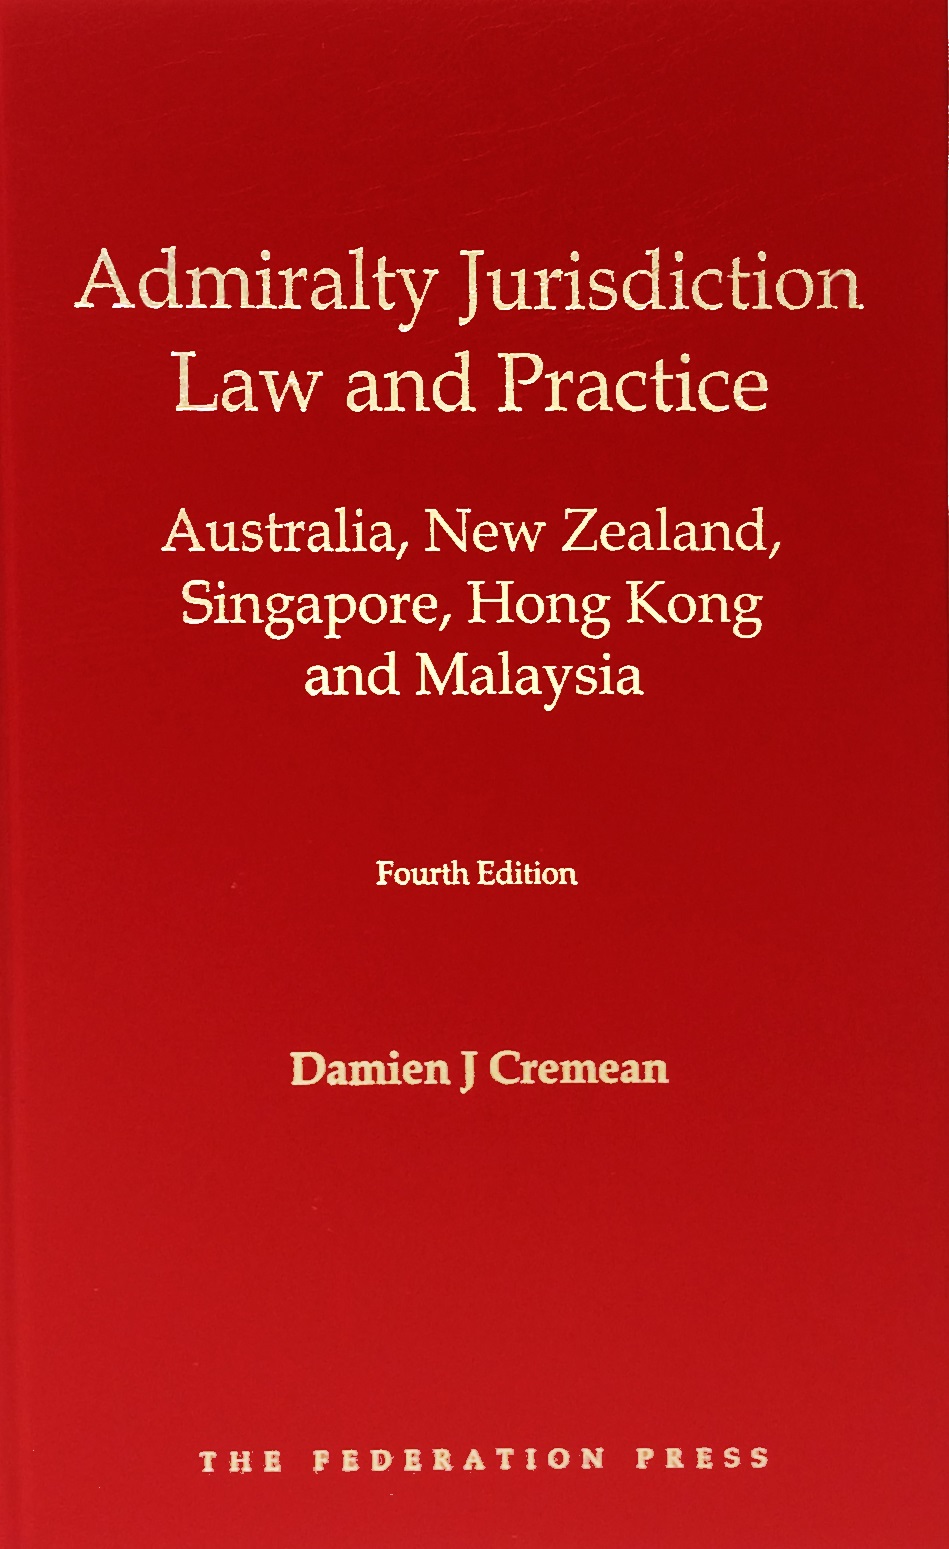 Admiralty Jurisdiction: Law and Practice e4